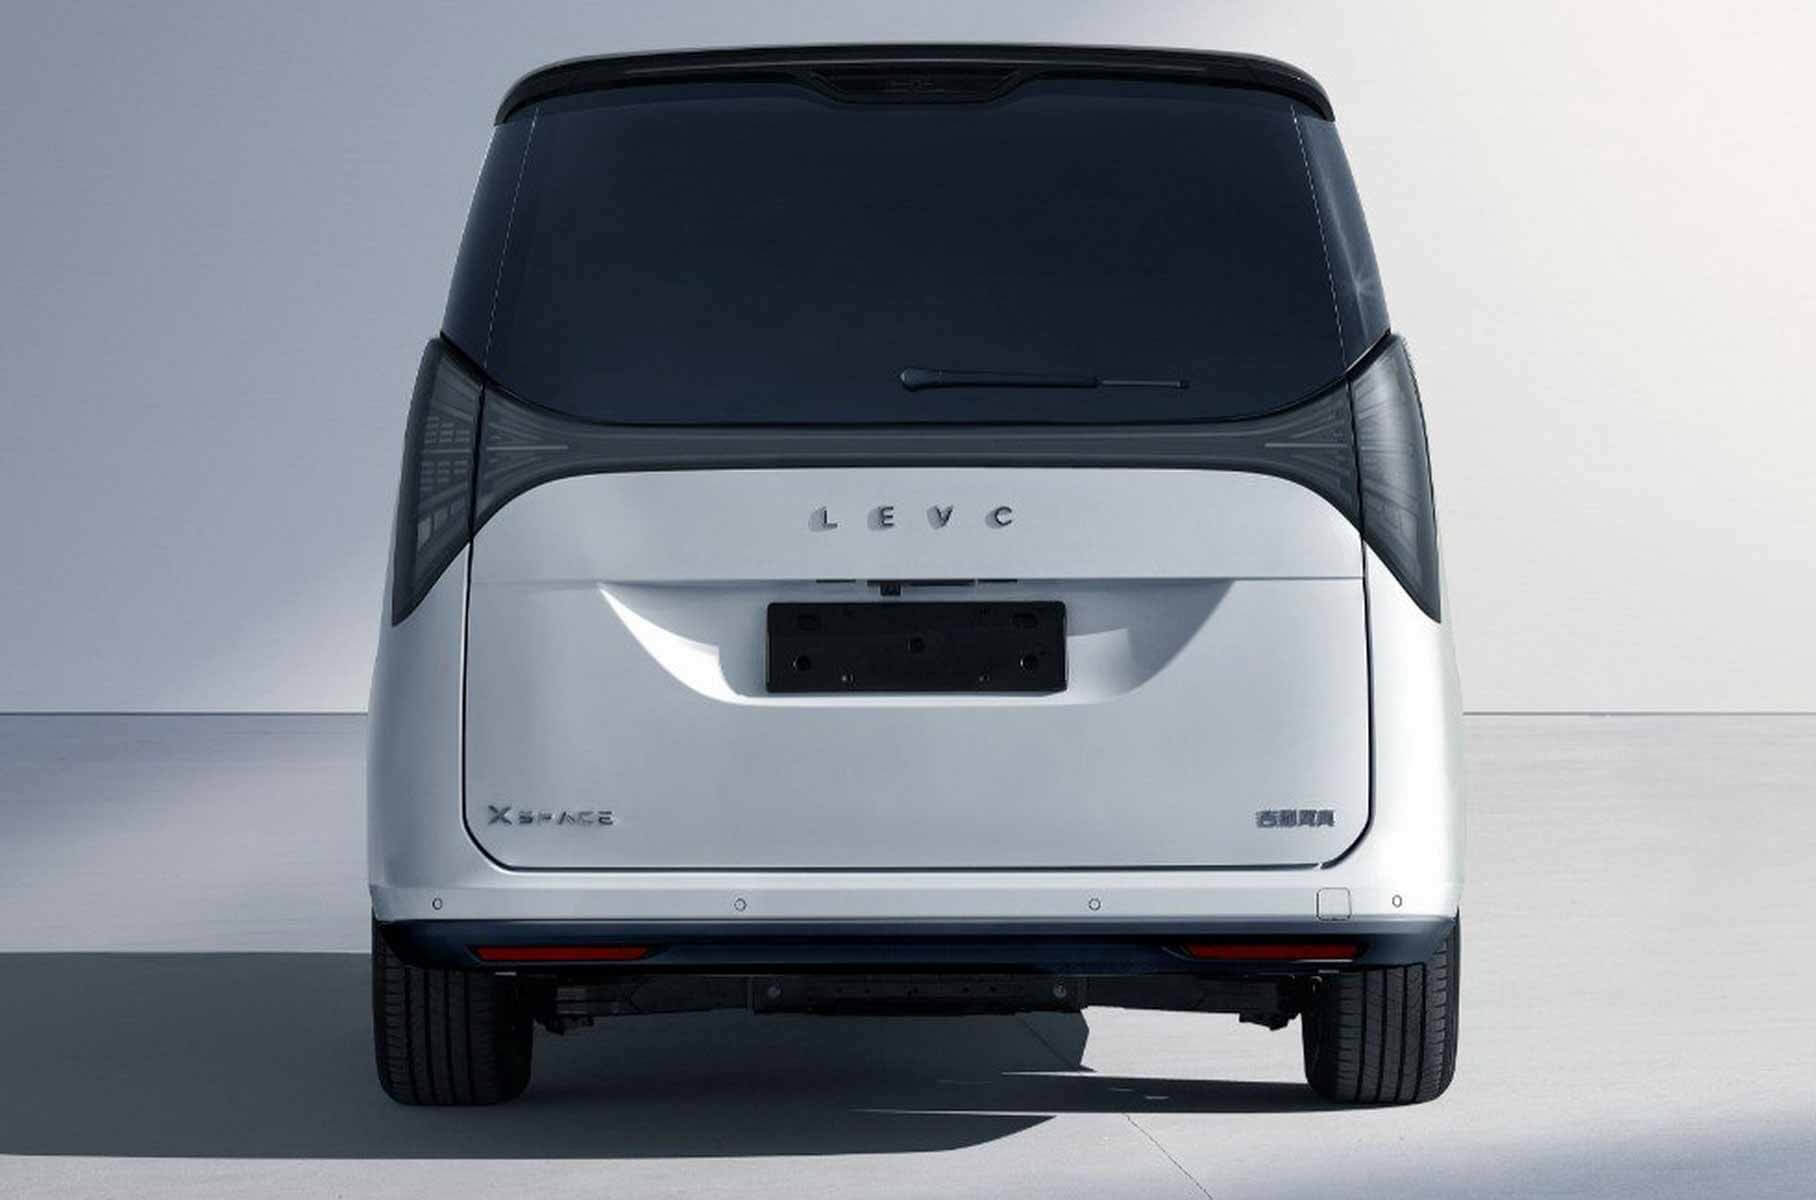 Geely’s first commercial minivan: appearance and characteristics